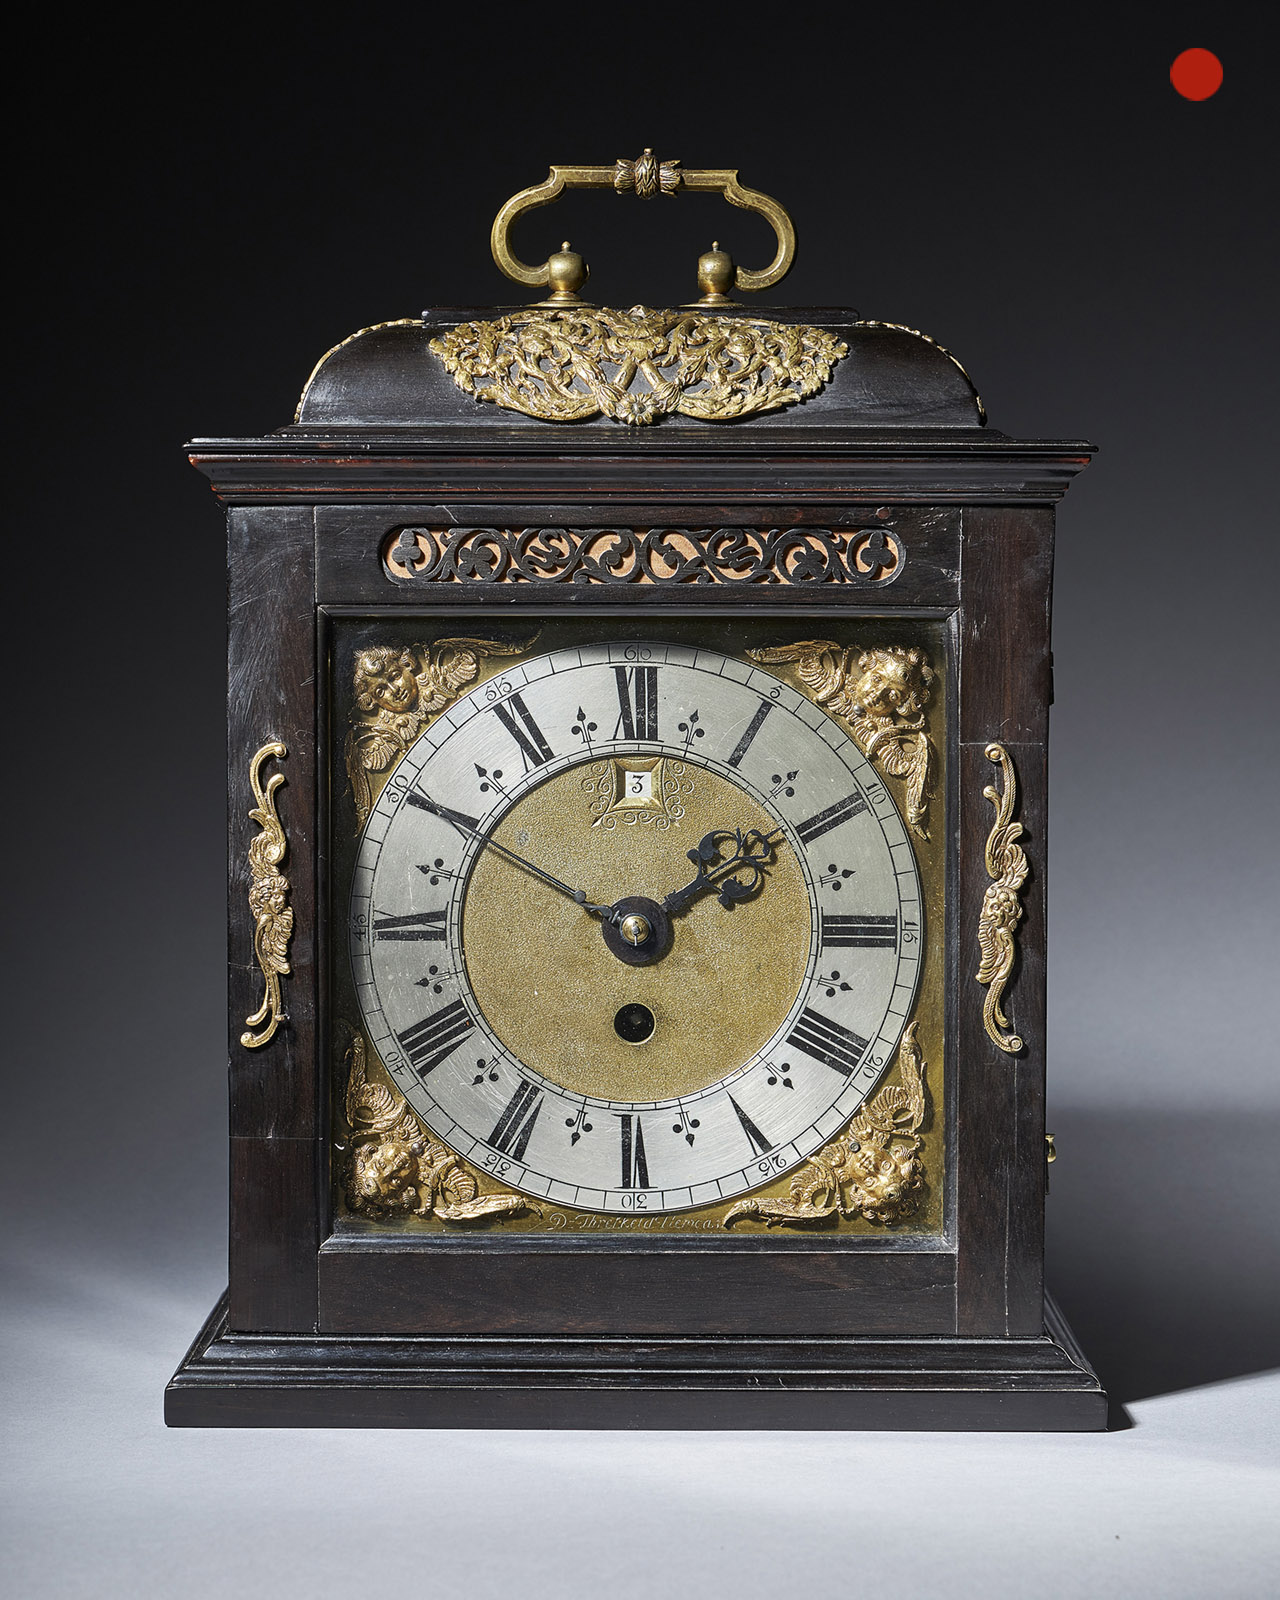 Fine 17th Century Charles II Spring Driven Table Clock by Deodatus Threlkeld 1